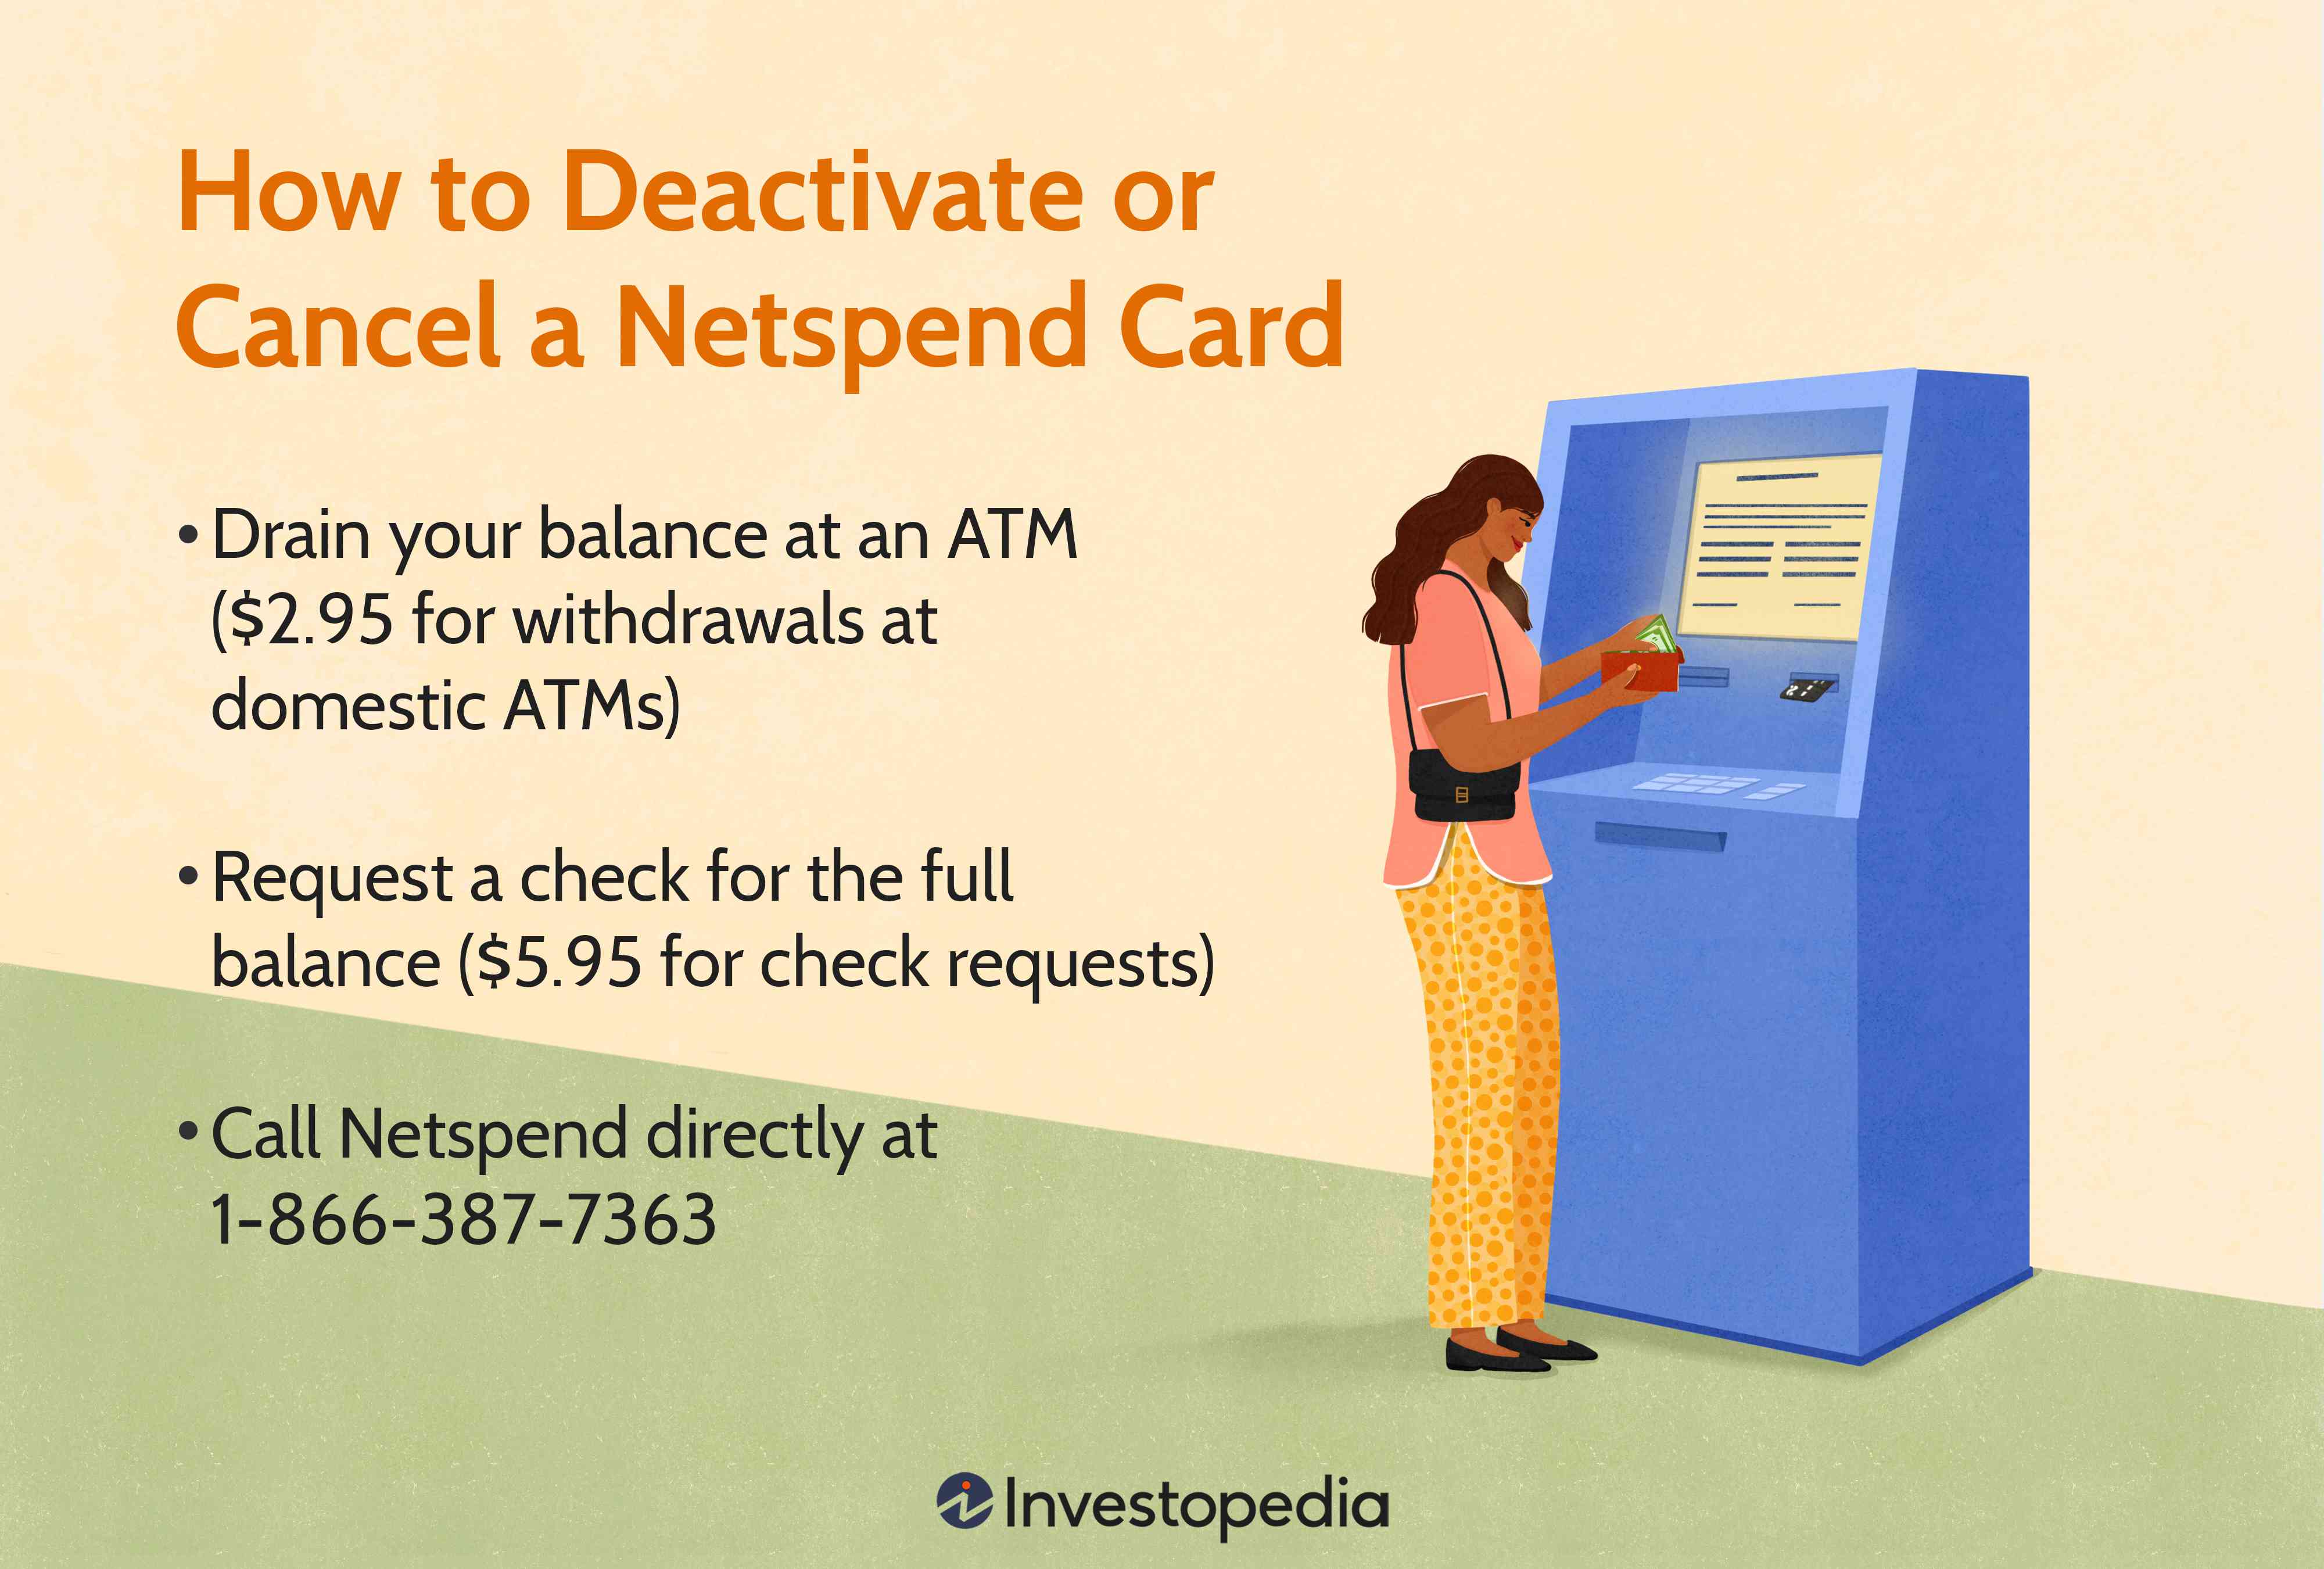 How to Deactivate or Cancel a Netspend Card